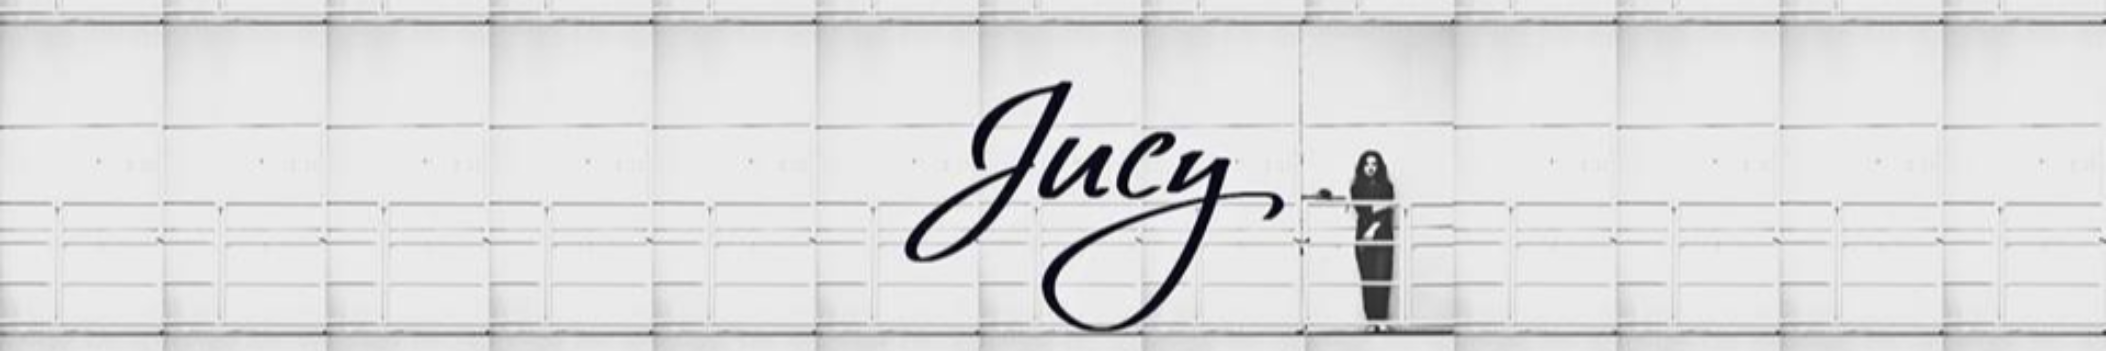 JUCY official